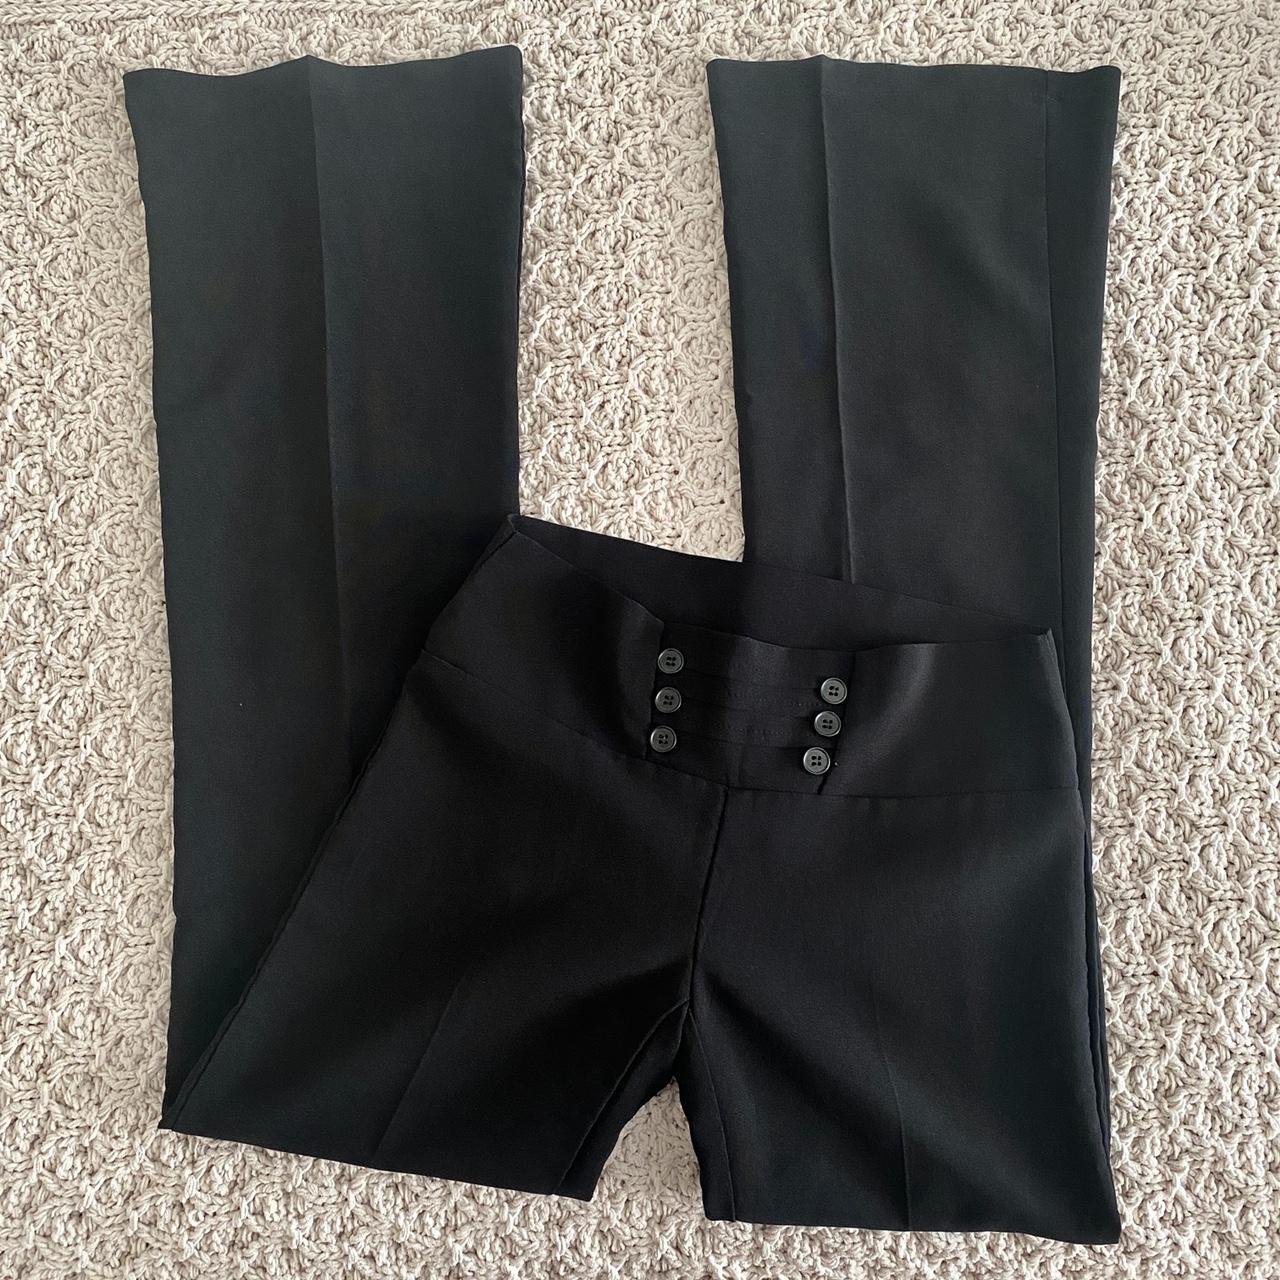 Black Flared Low rise Pants low/mid rise casual... - Depop